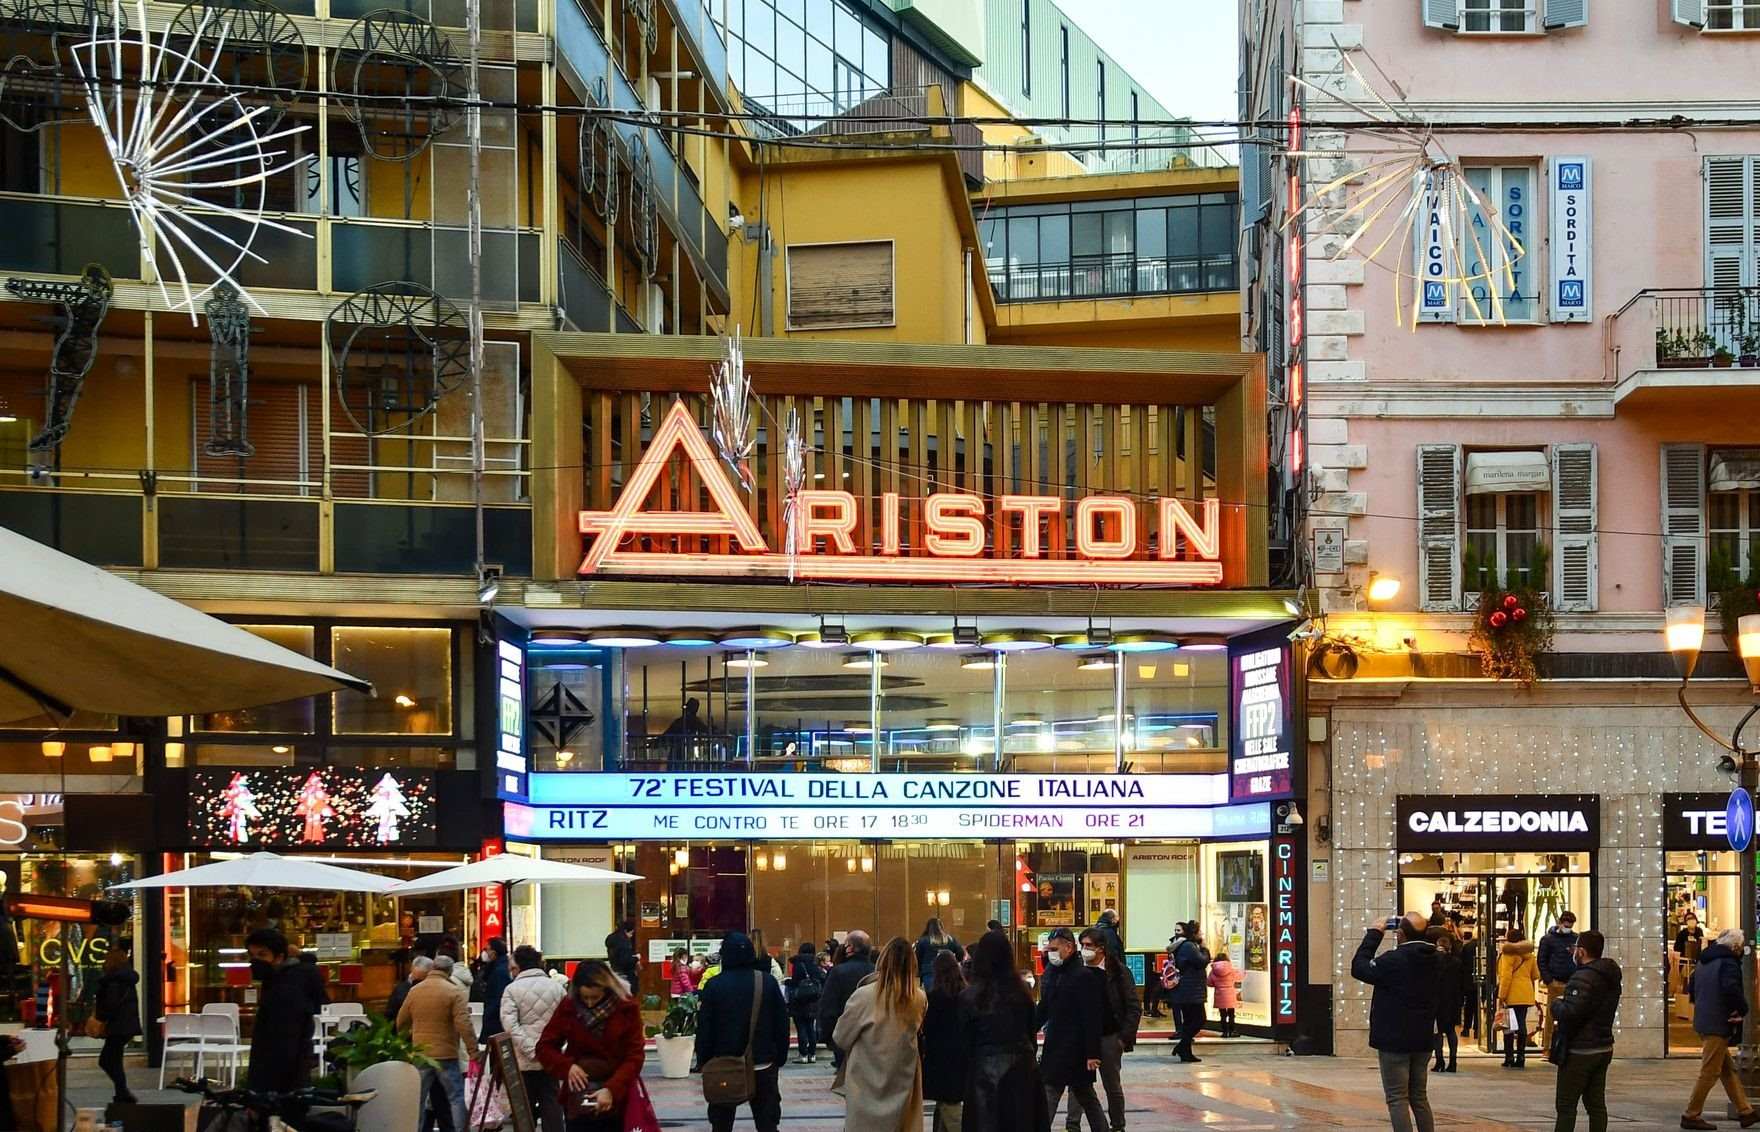 8-intriguing-facts-about-teatro-ariston